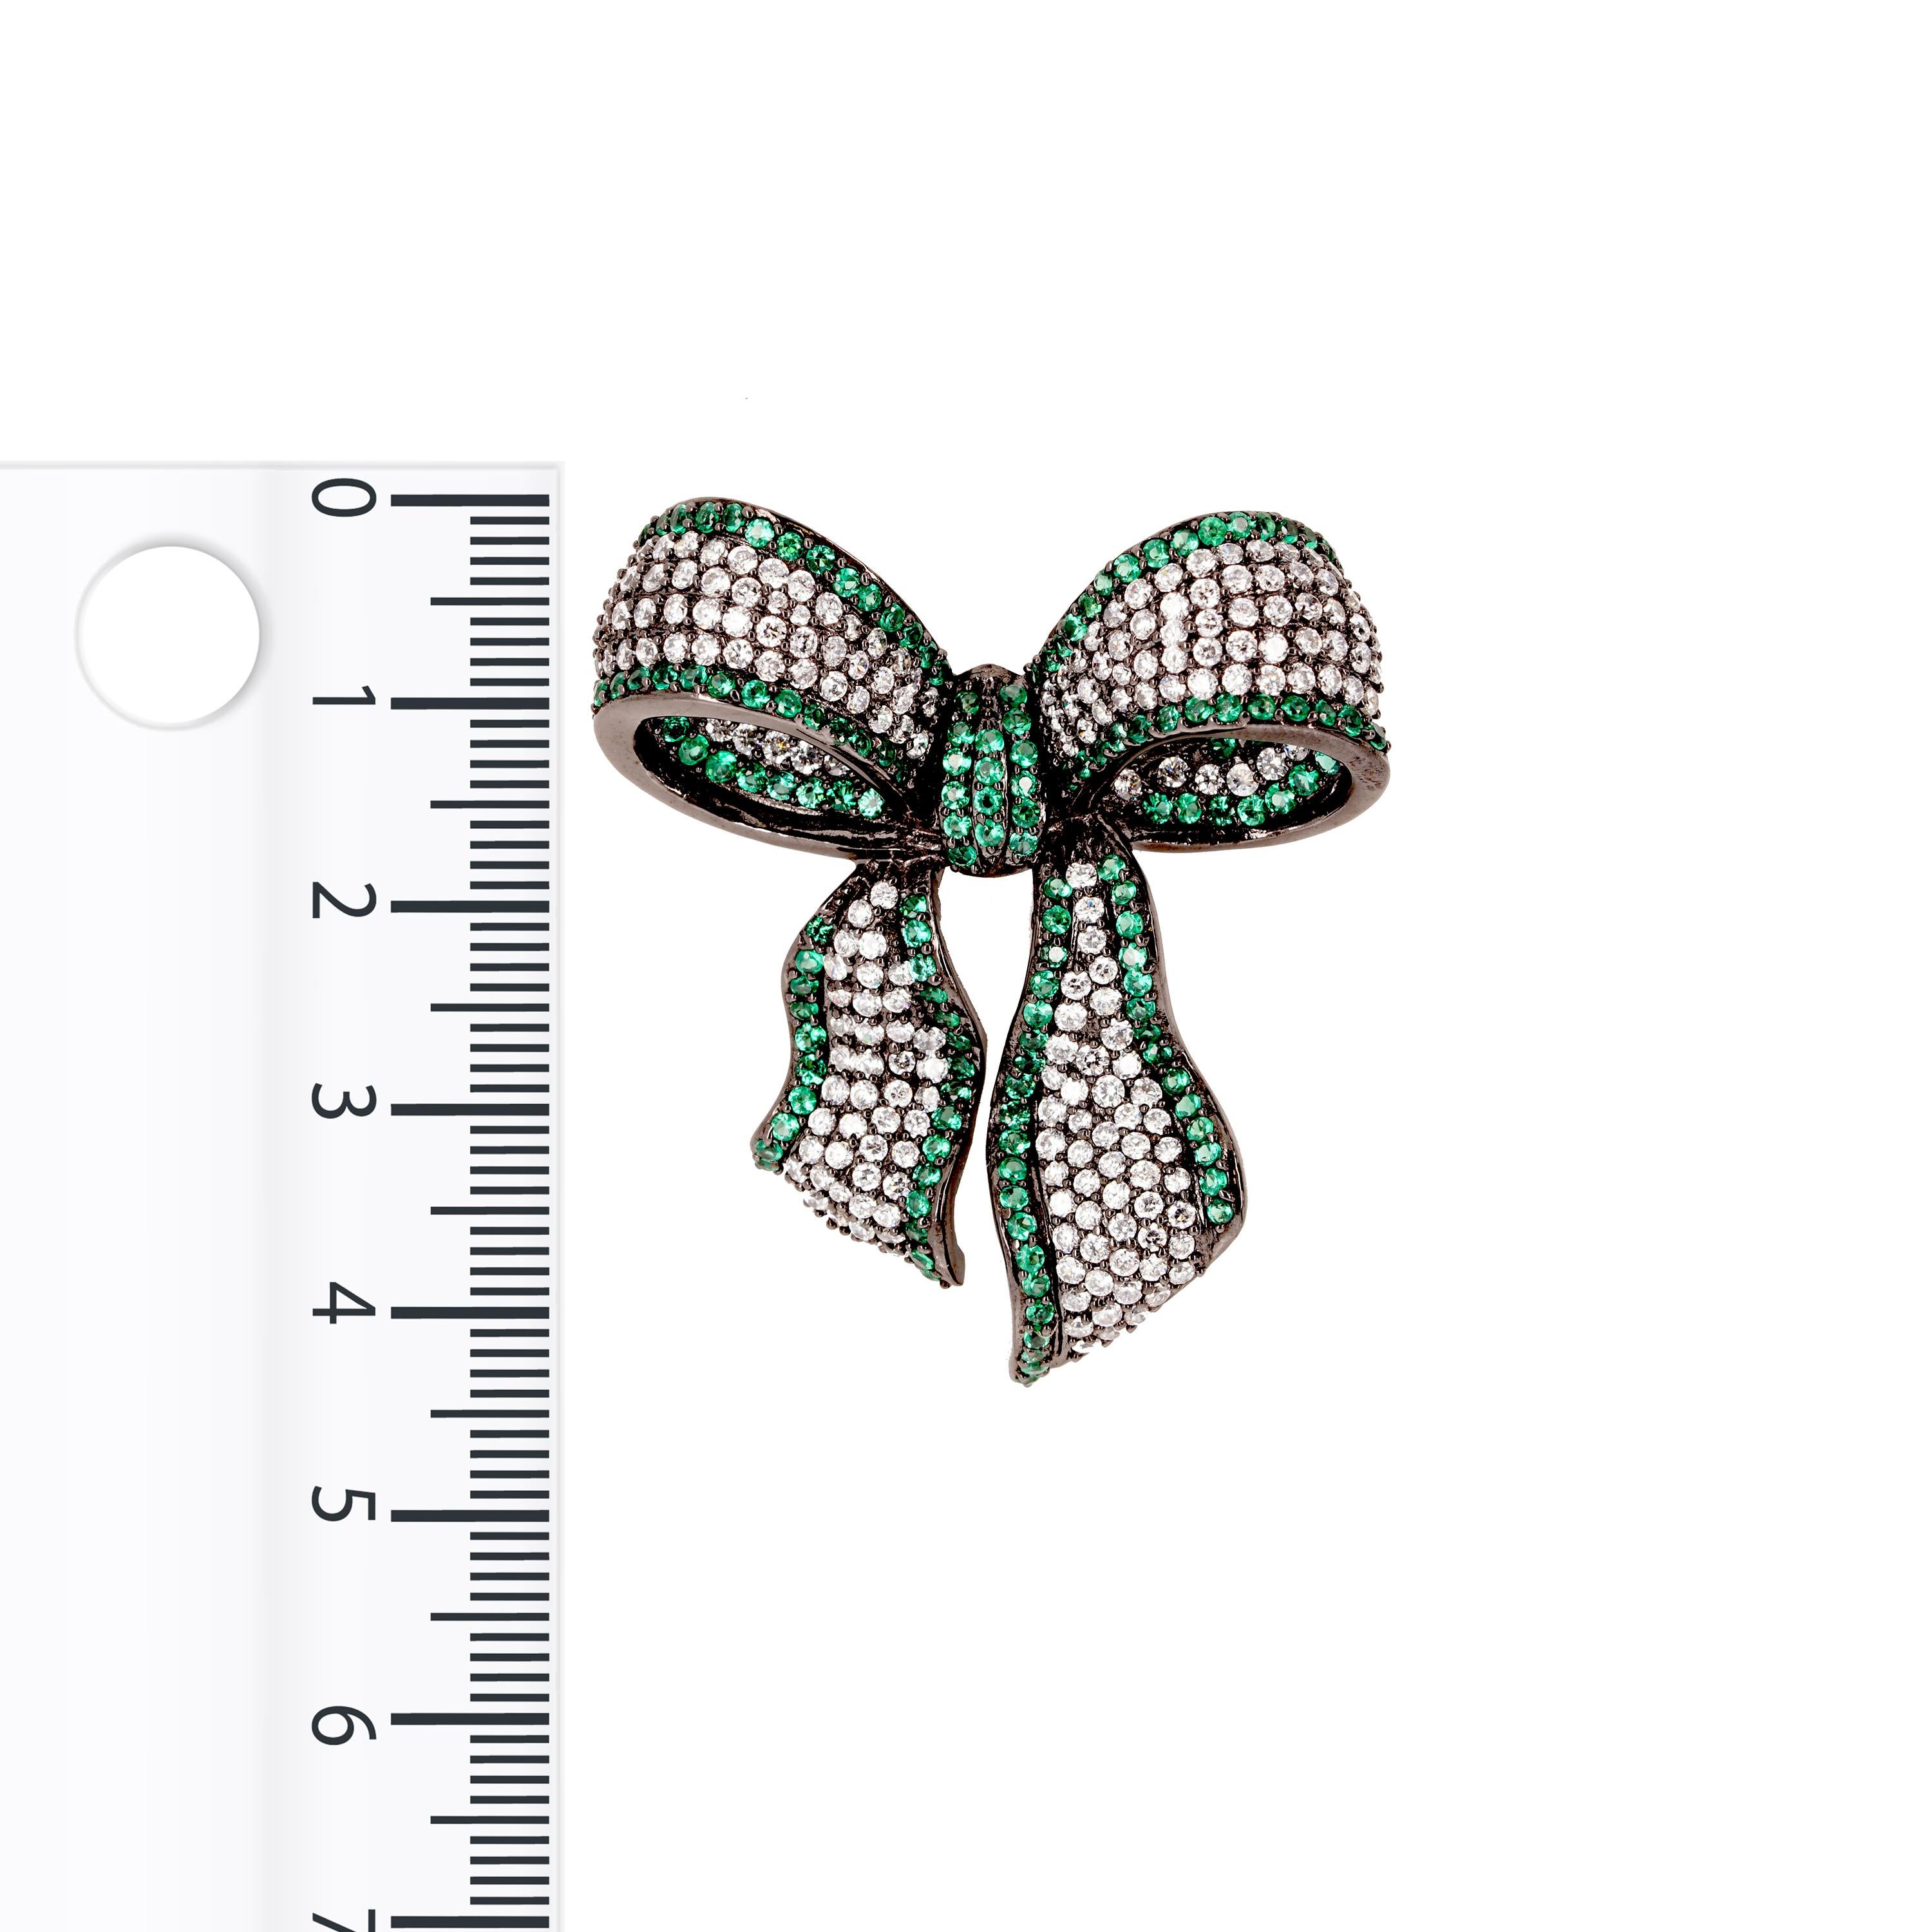 Tie up your outfit with a bedazzled ribbon bow. The classic bow motif is conveyed through a feminine sculptural silhouette and vibrant coloured gemstones, featuring white cubic zirconia hemmed with emerald green cubic zirconia, set in black